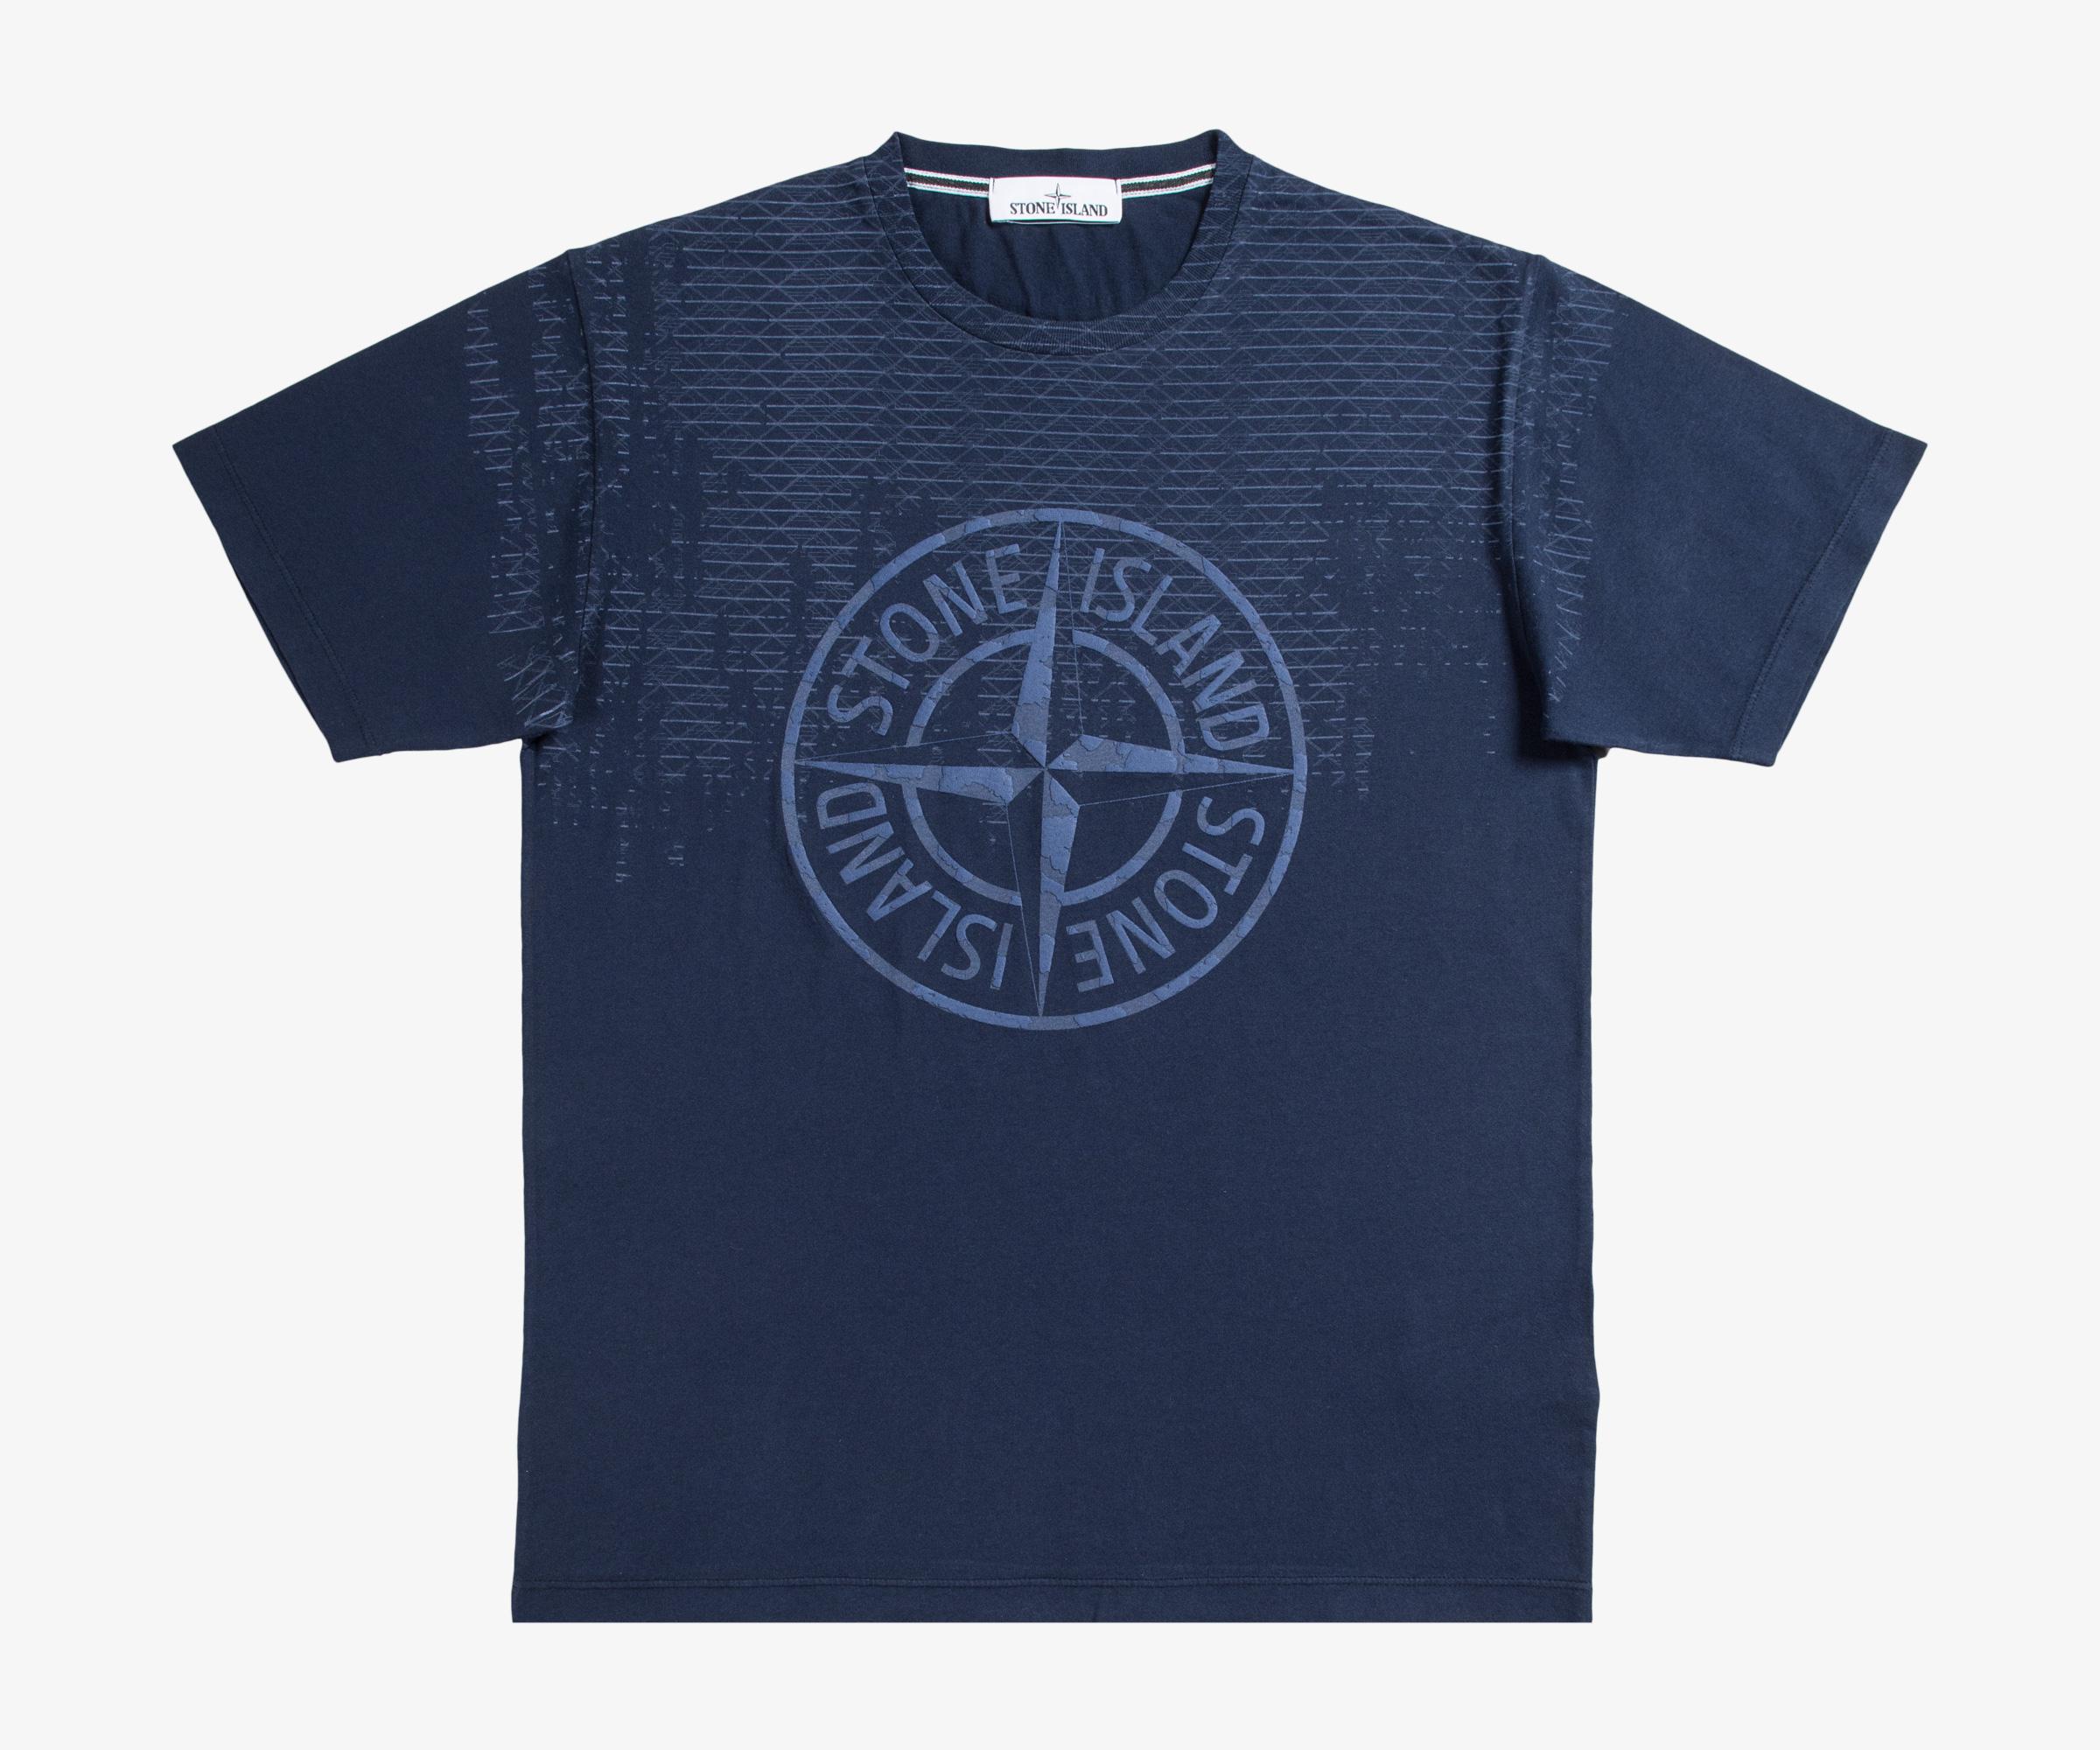 Stone Island Cotton Compass Logo T-shirt Navy in Blue for Men - Lyst